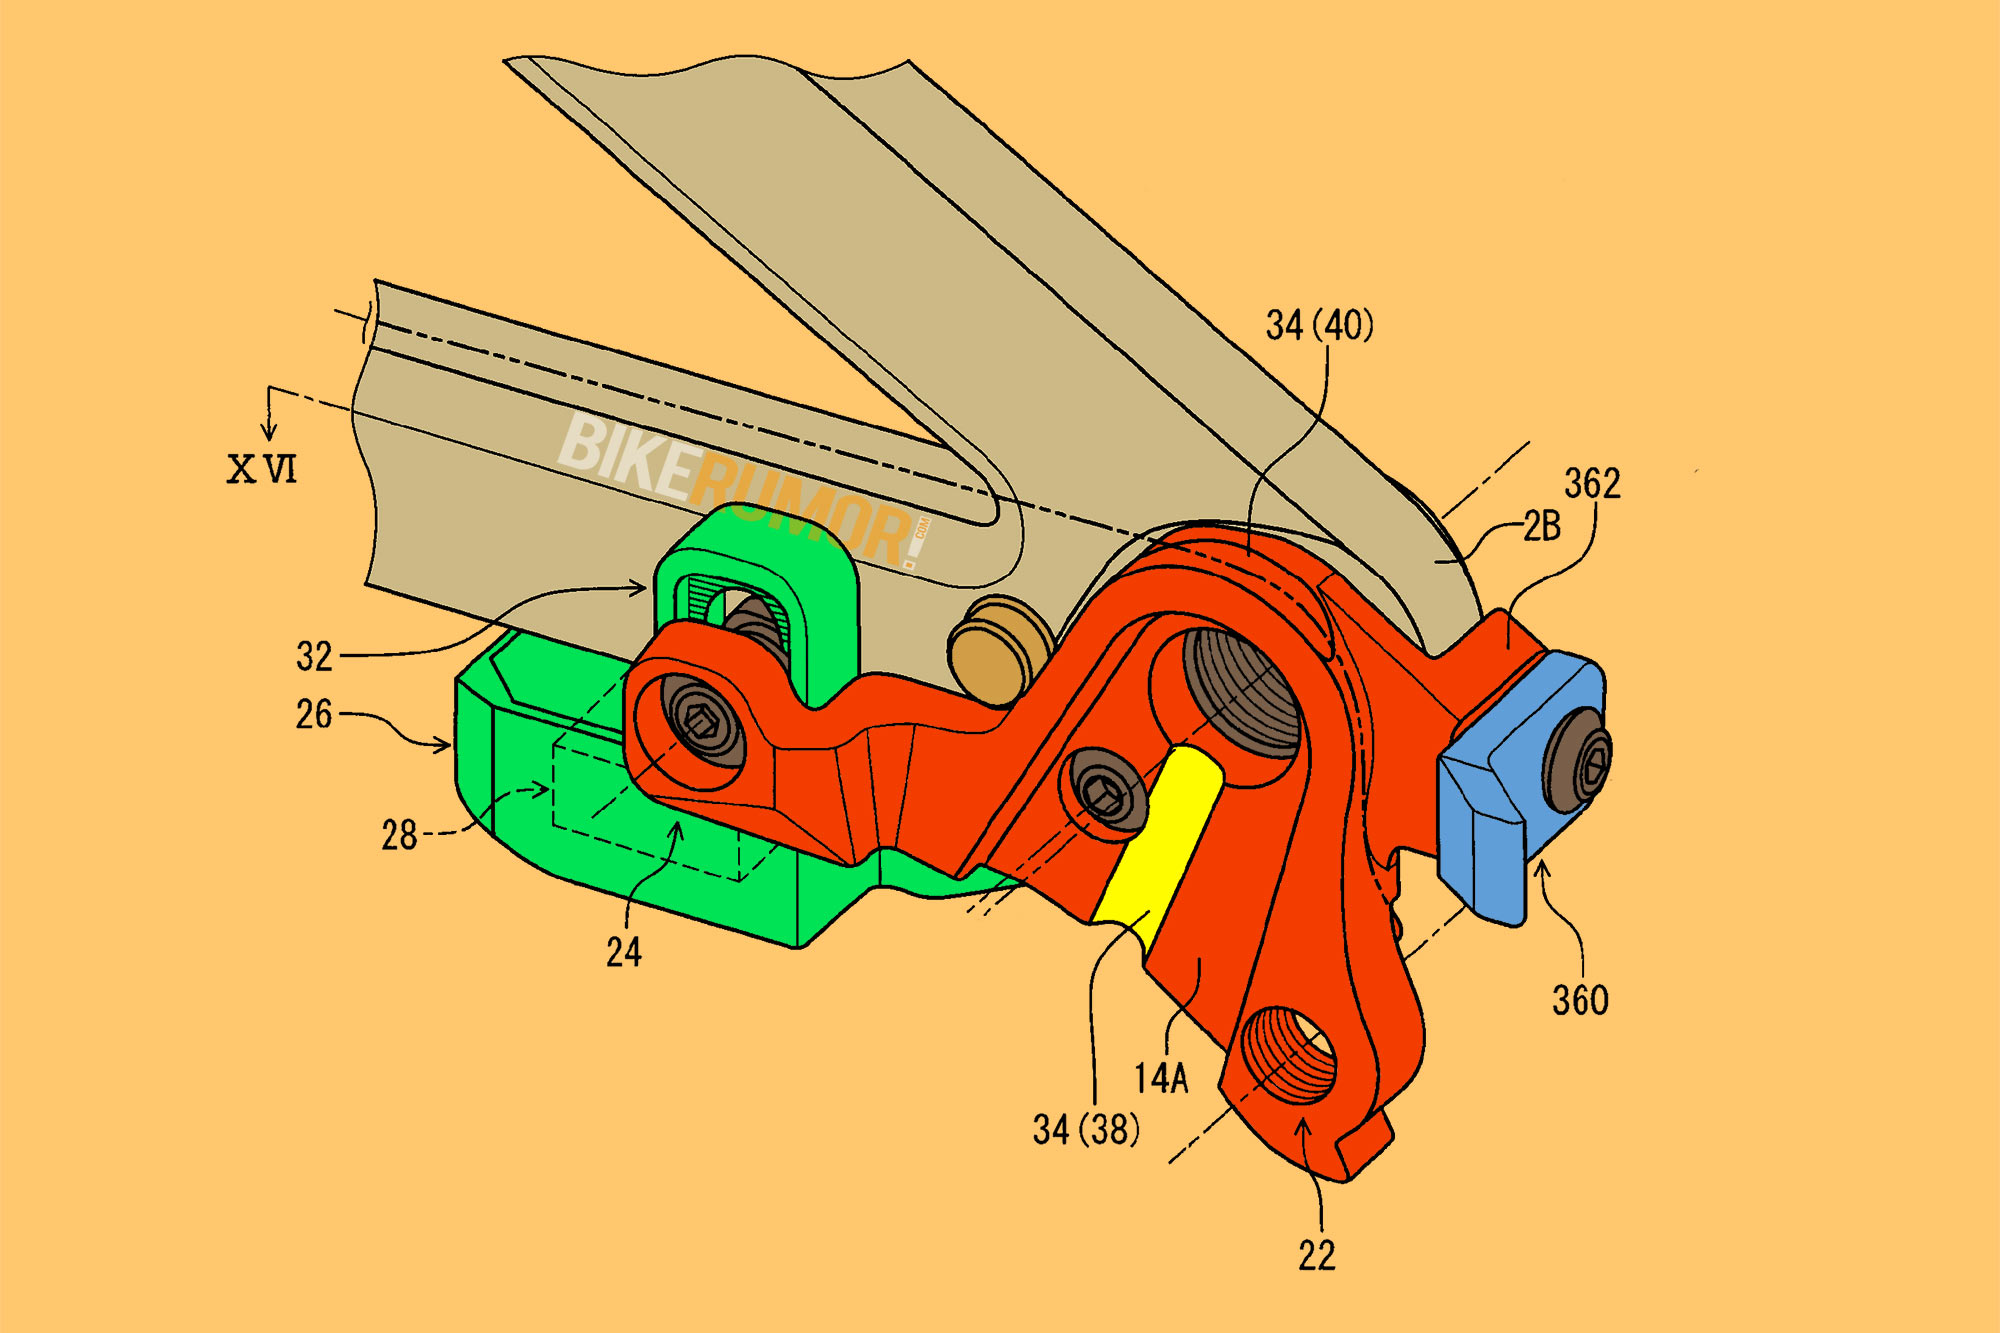 Shimano Derailleur Hanger Patent Opens Up Many Possibilities with Another New Standard